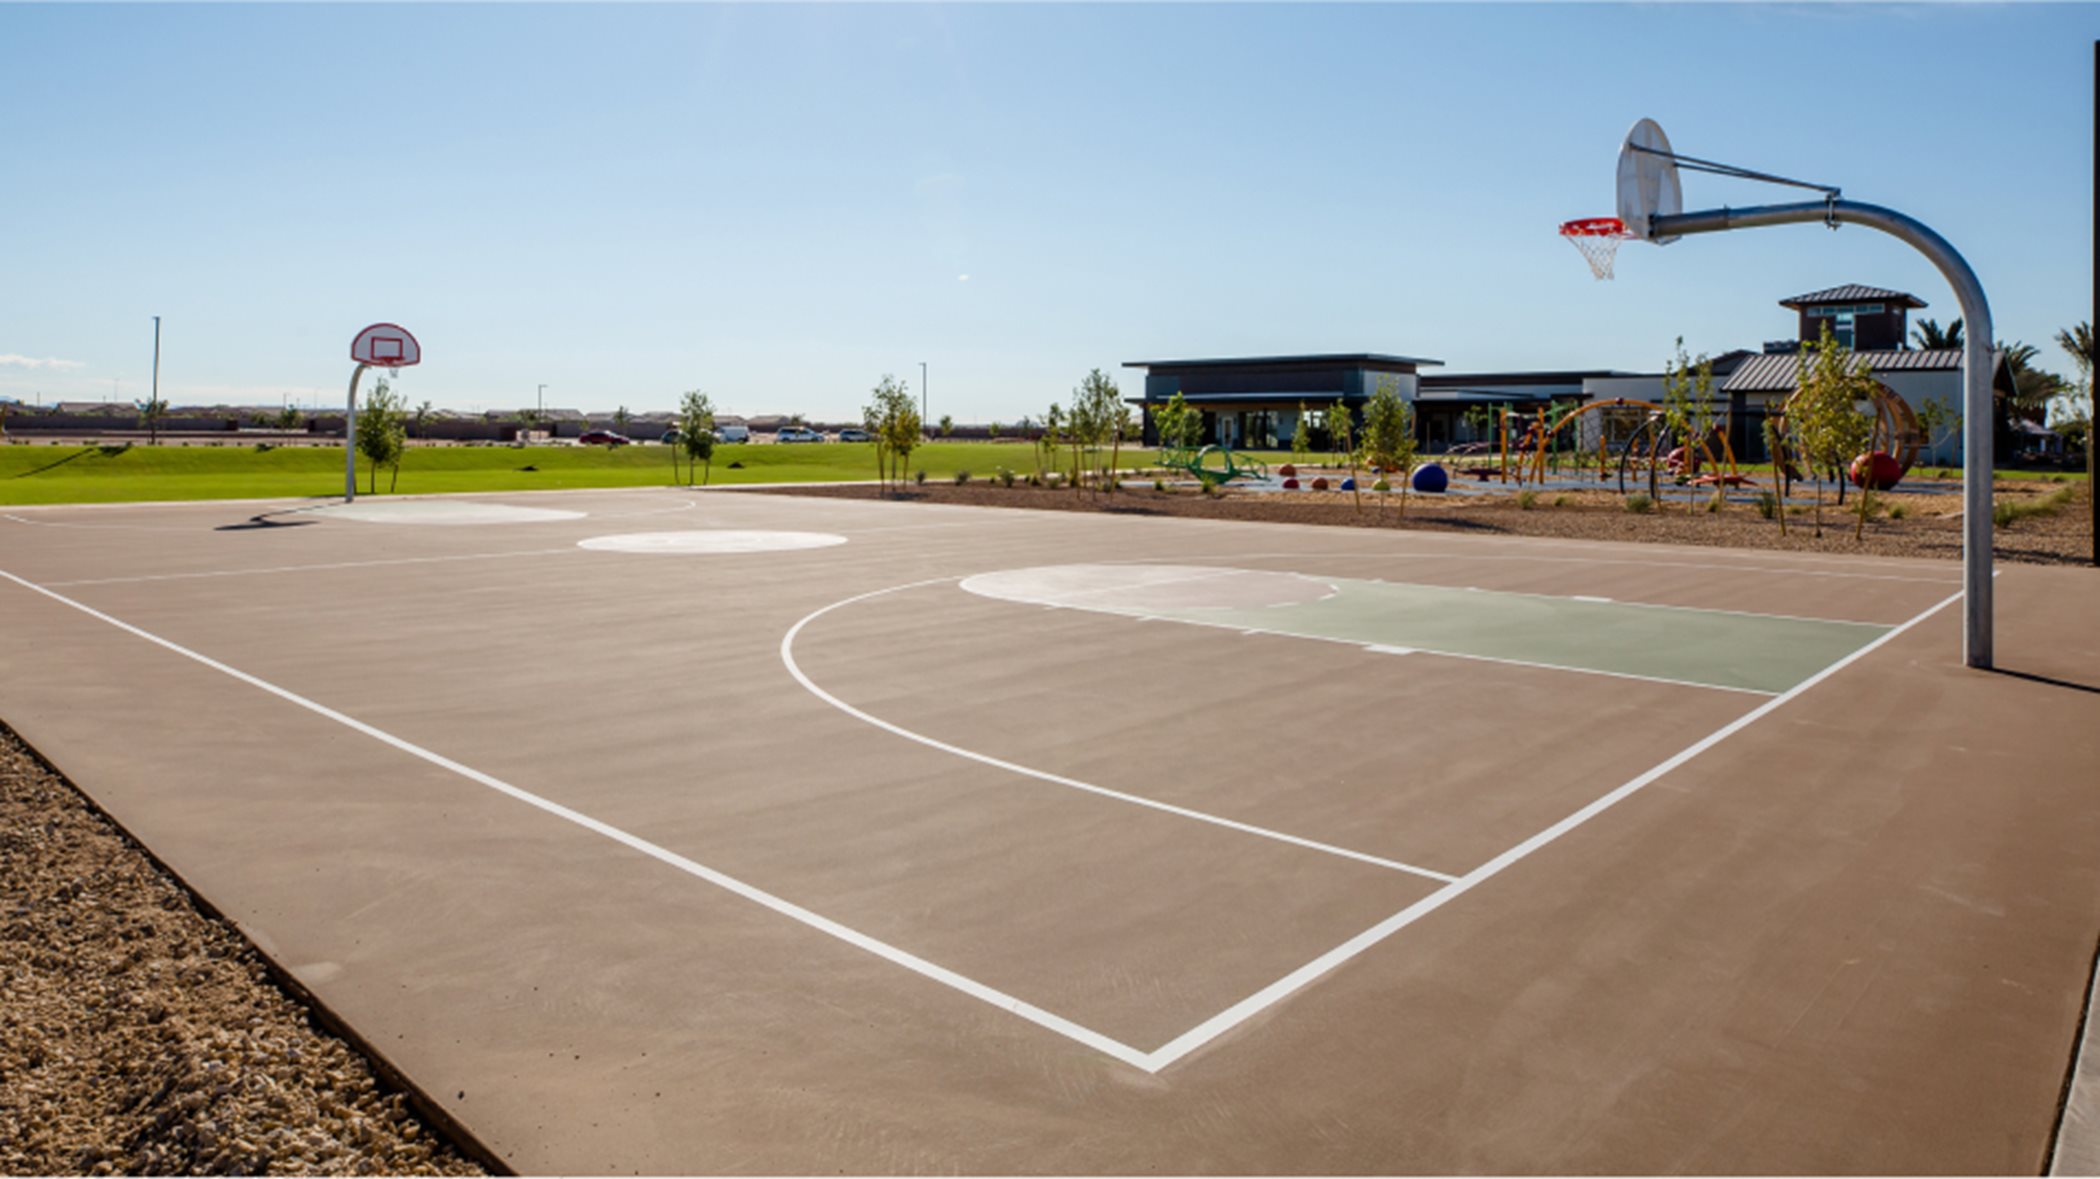 Basketball court in daylight